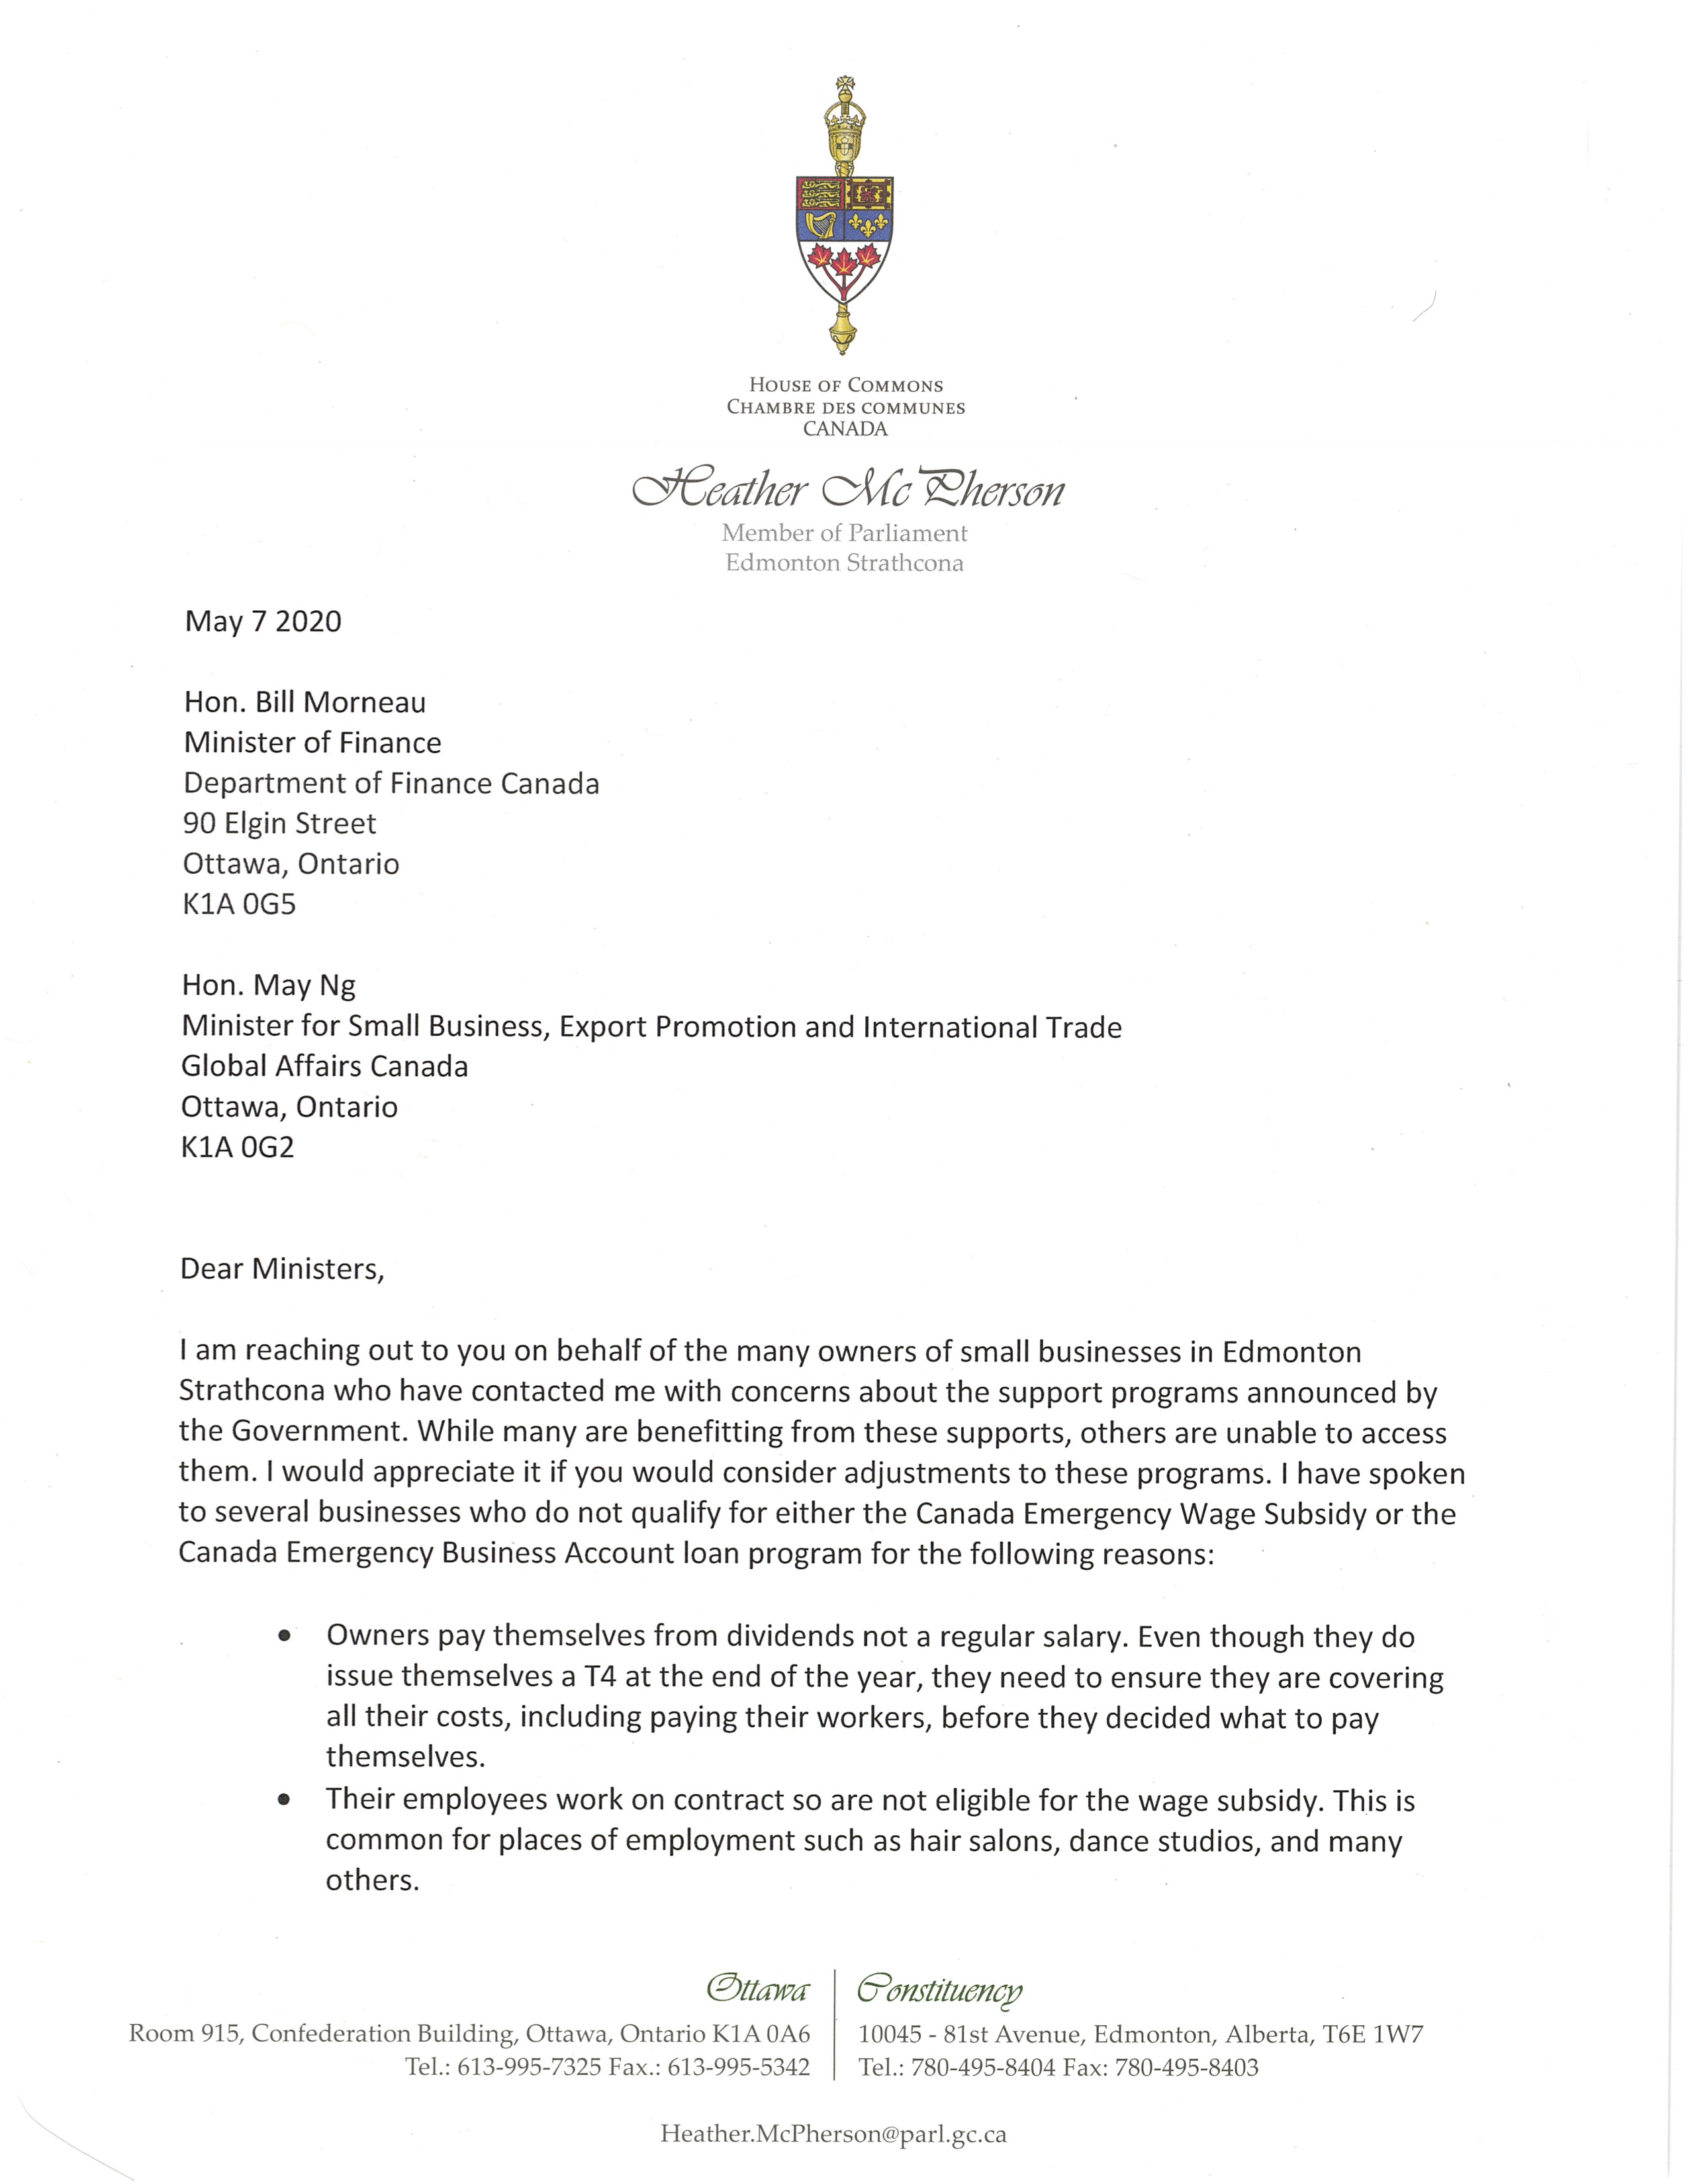 Letter to Ministers Morneau & Ng Page 1